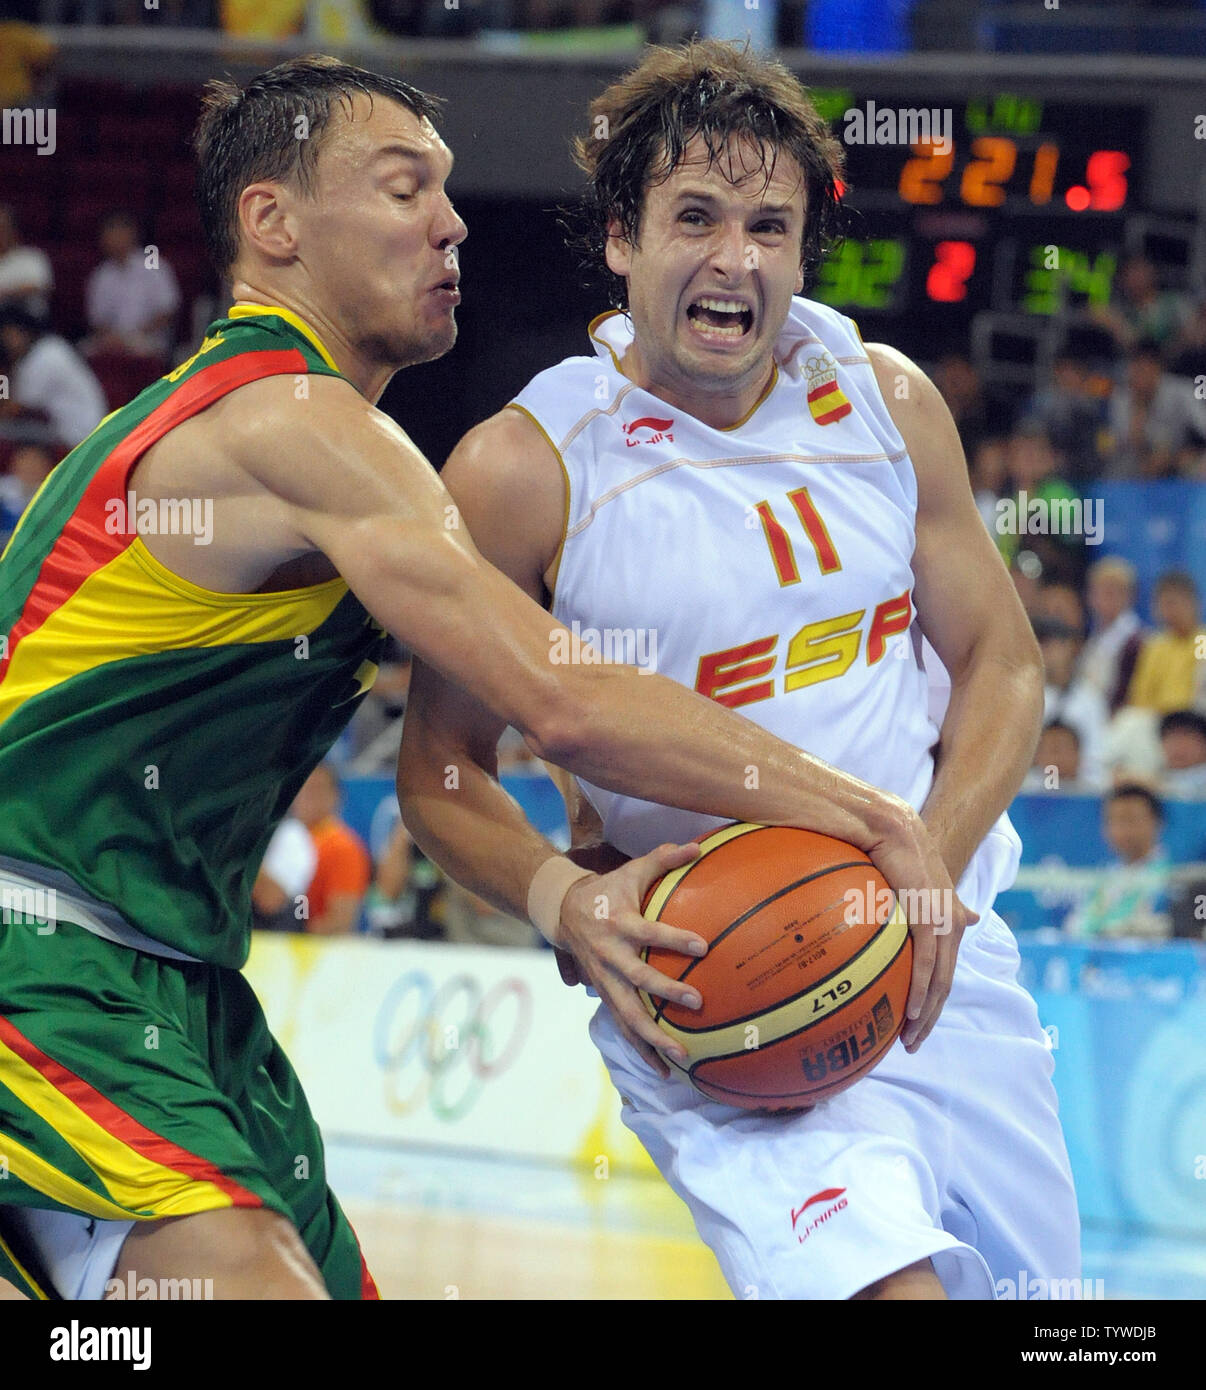 Spain's Raul Lopez drives to the net as Lithuania's Sarunas Jasikevicius  defends in the second quarter of their seminfinal Men's Basketball game  during the 2008 Summer Olympics in Beijing on August 22,